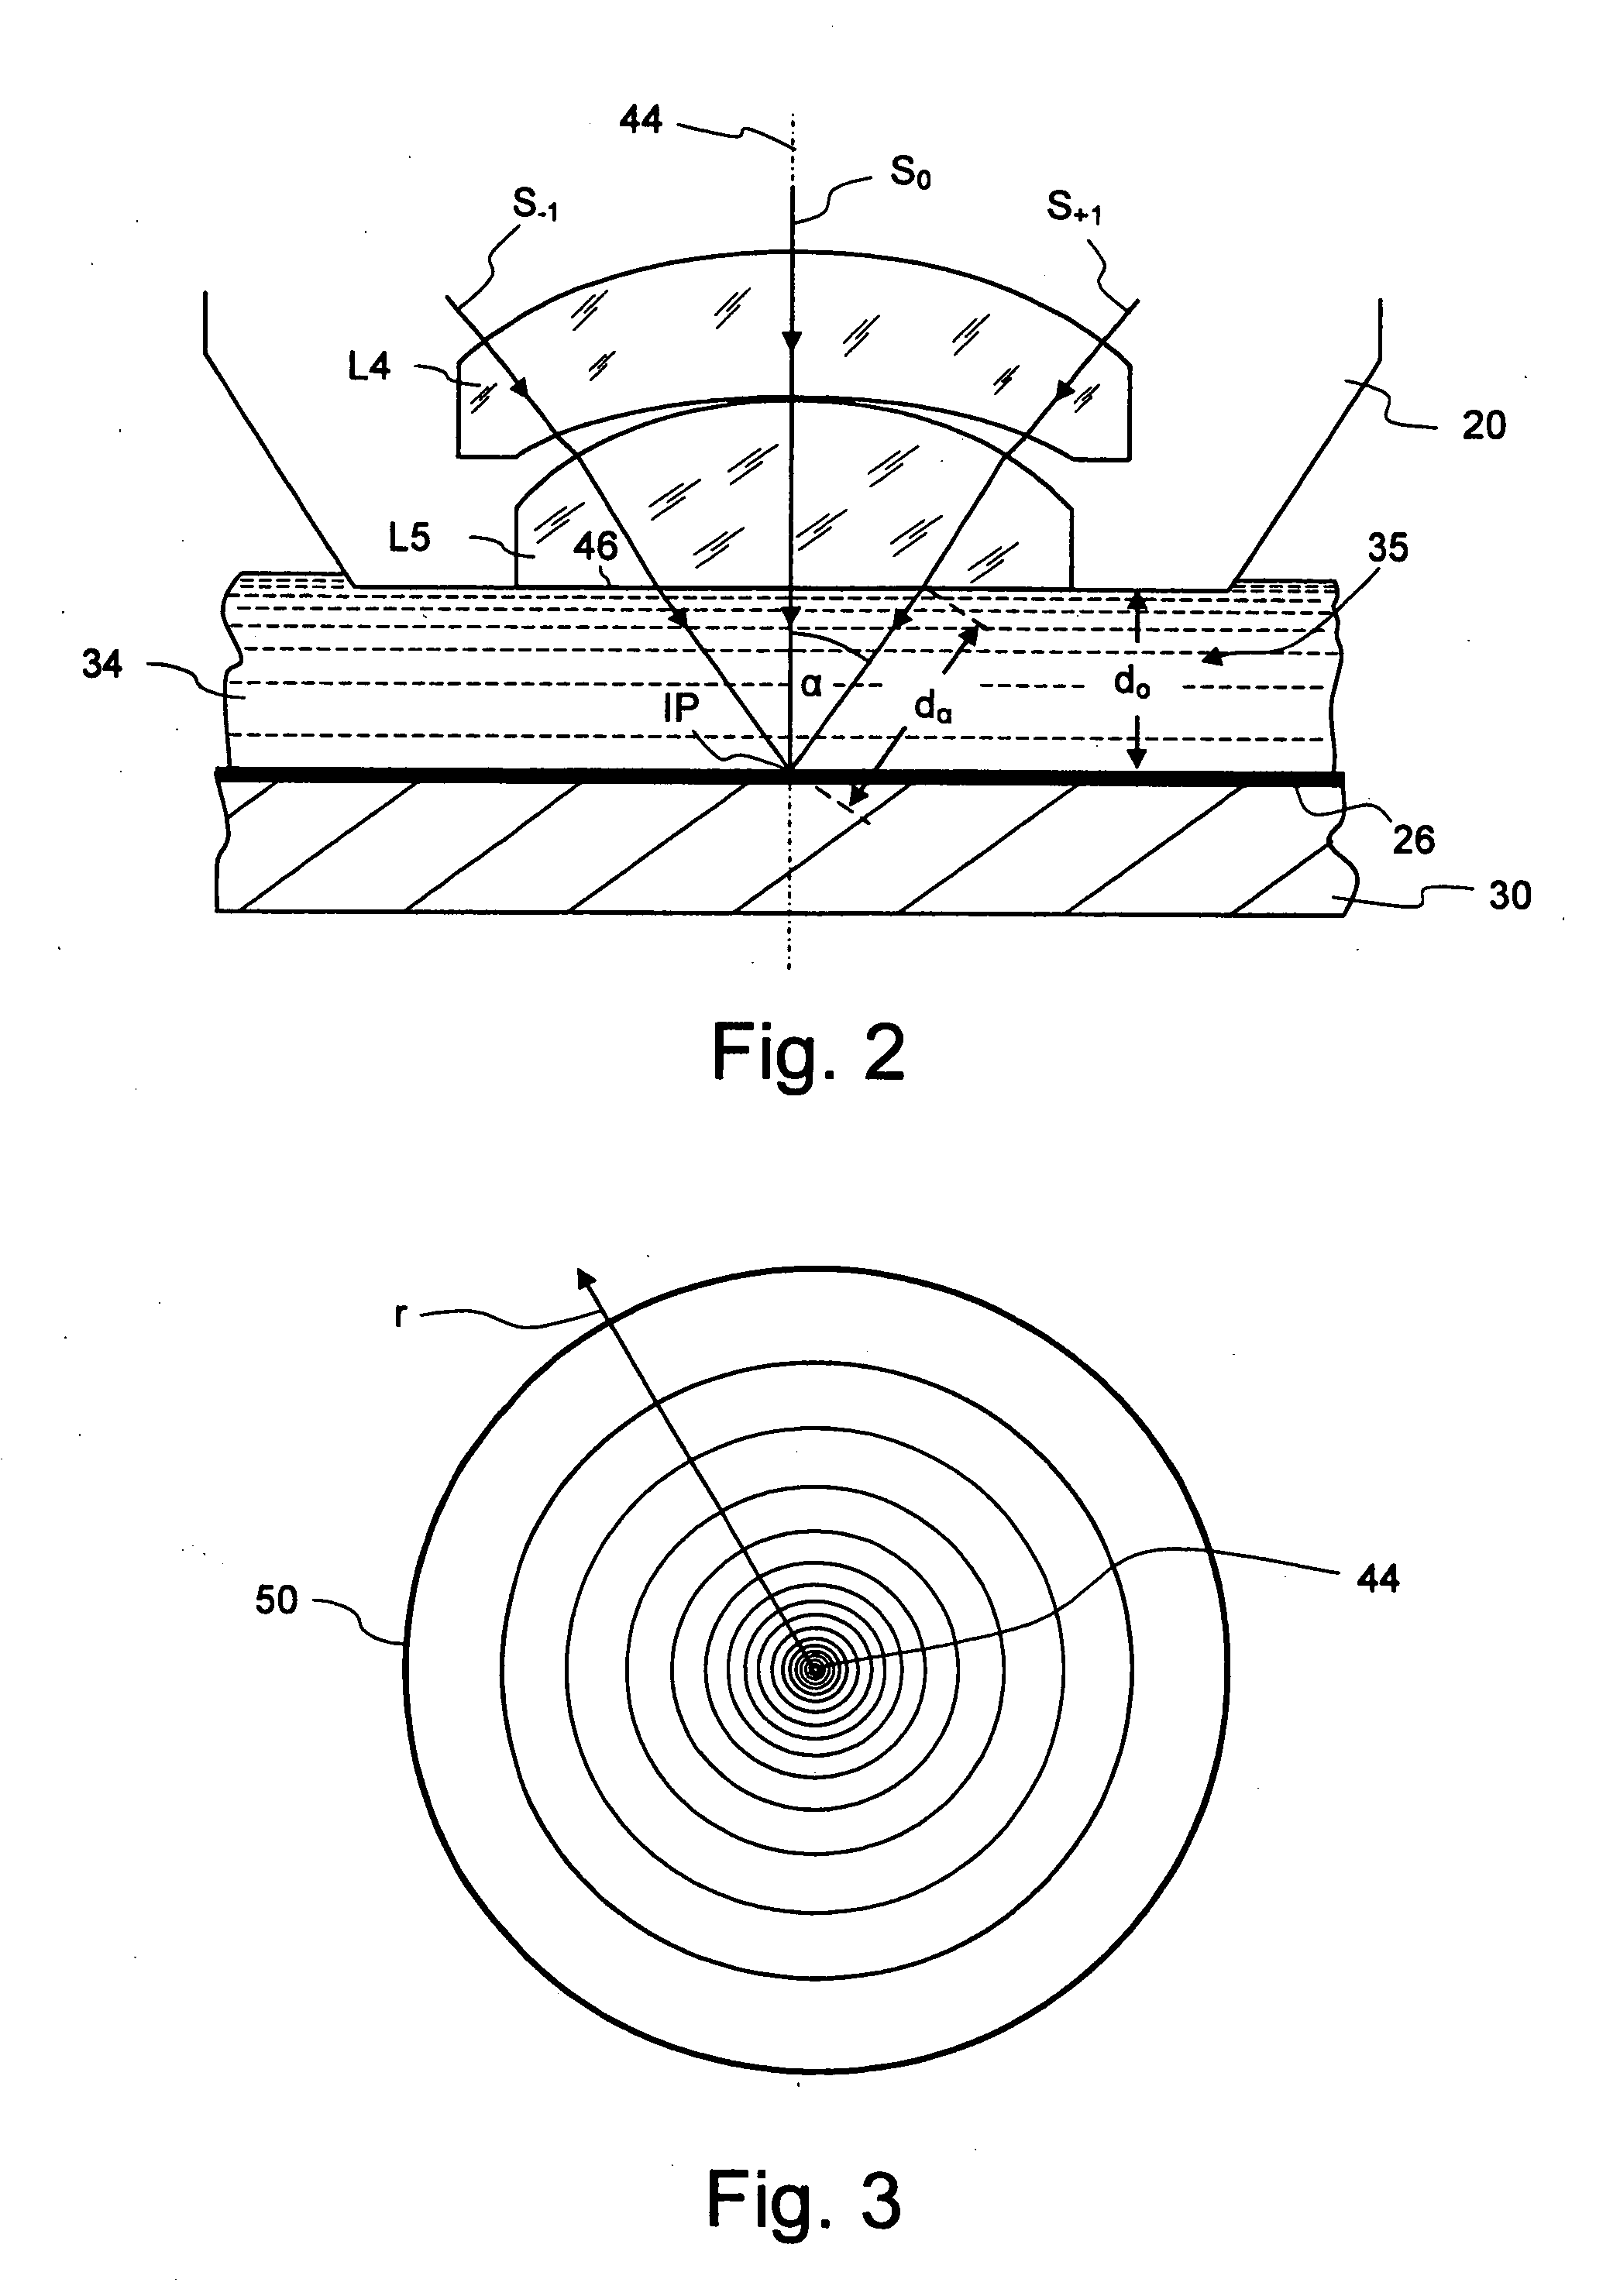 Microlithographic projection exposure apparatus with immersion projection lens